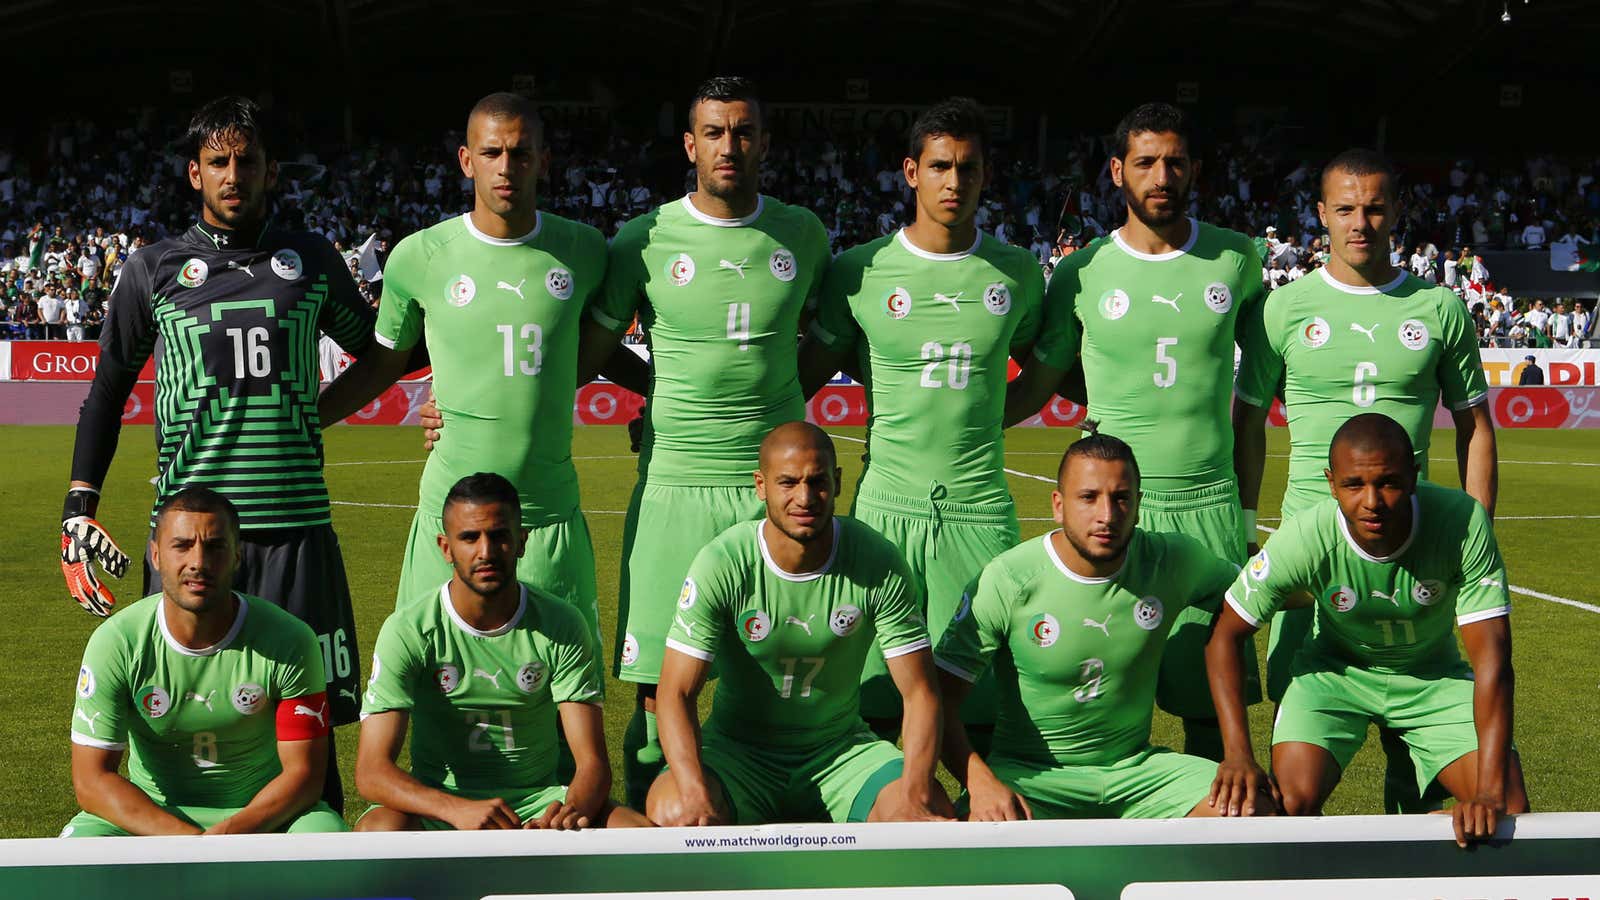 Two-thirds of Algeria’s World Cup squad were born in France.